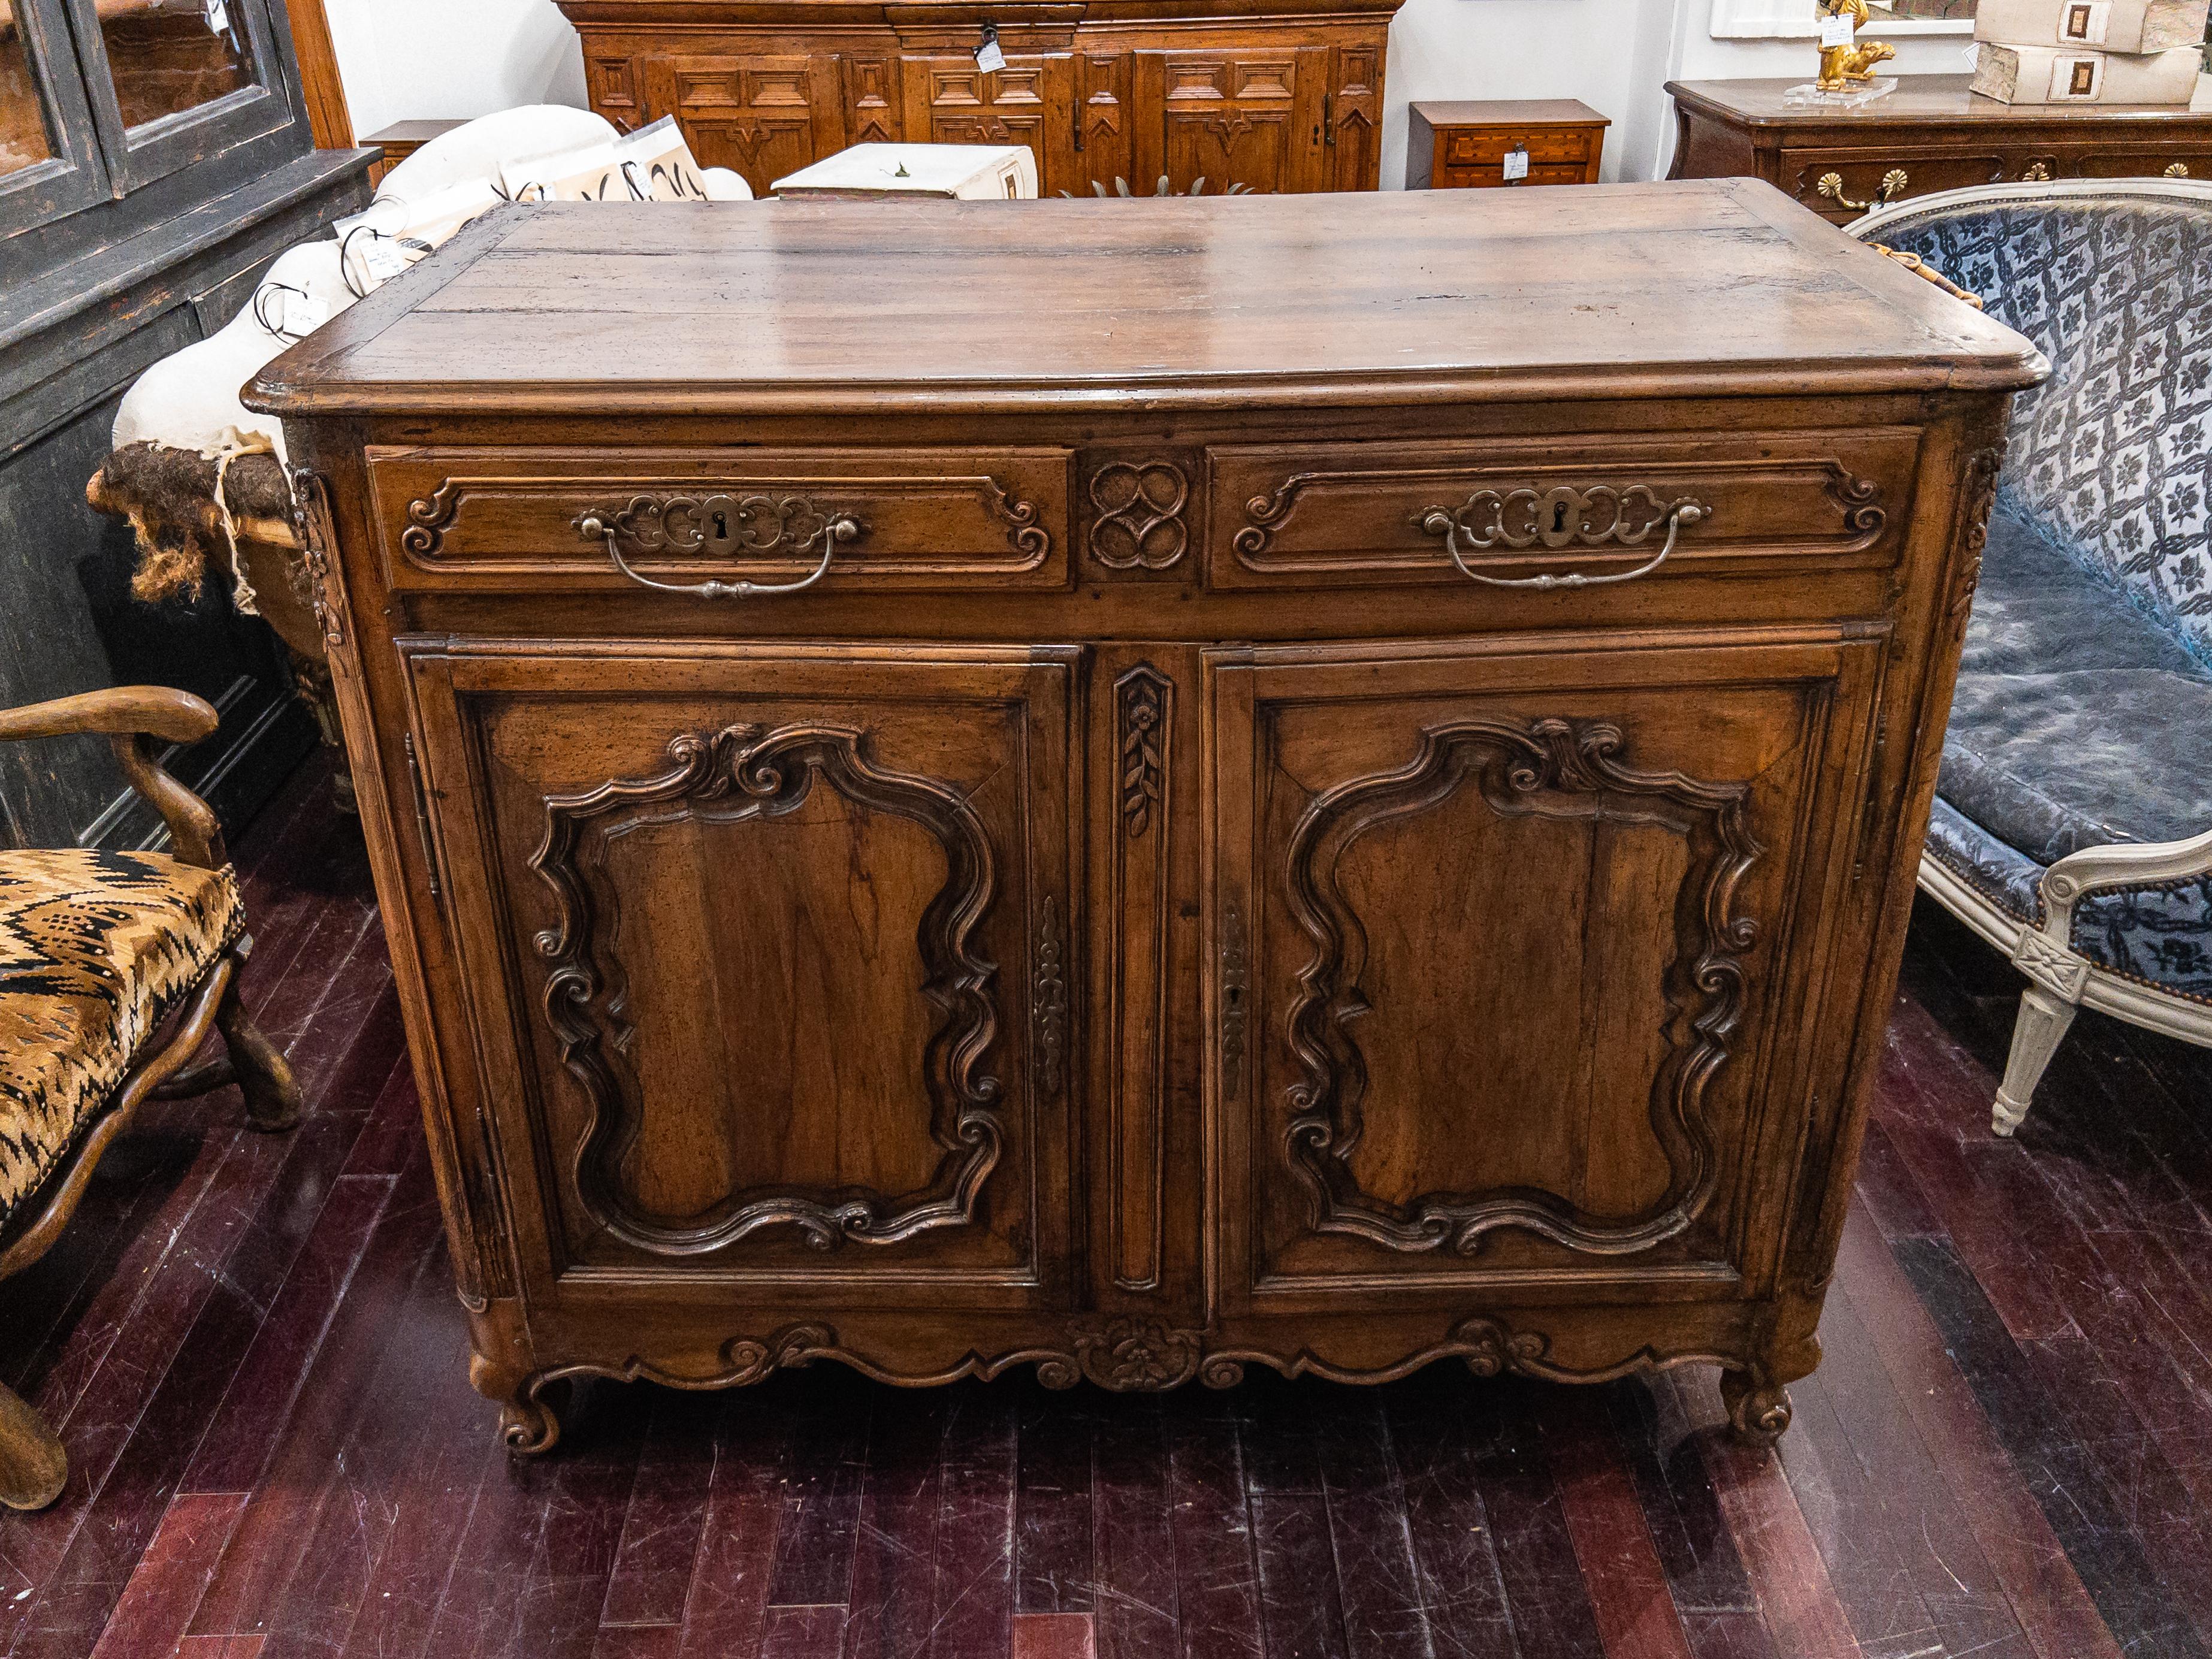 18th Century Walnut French Buffet. This lovely cabinet is a genuine antique and dates to the 18th century. It features two hand carved drawers over two paneled cupboard doors, a scalloped apron on cabriole feet and a beautiful patina.

Please